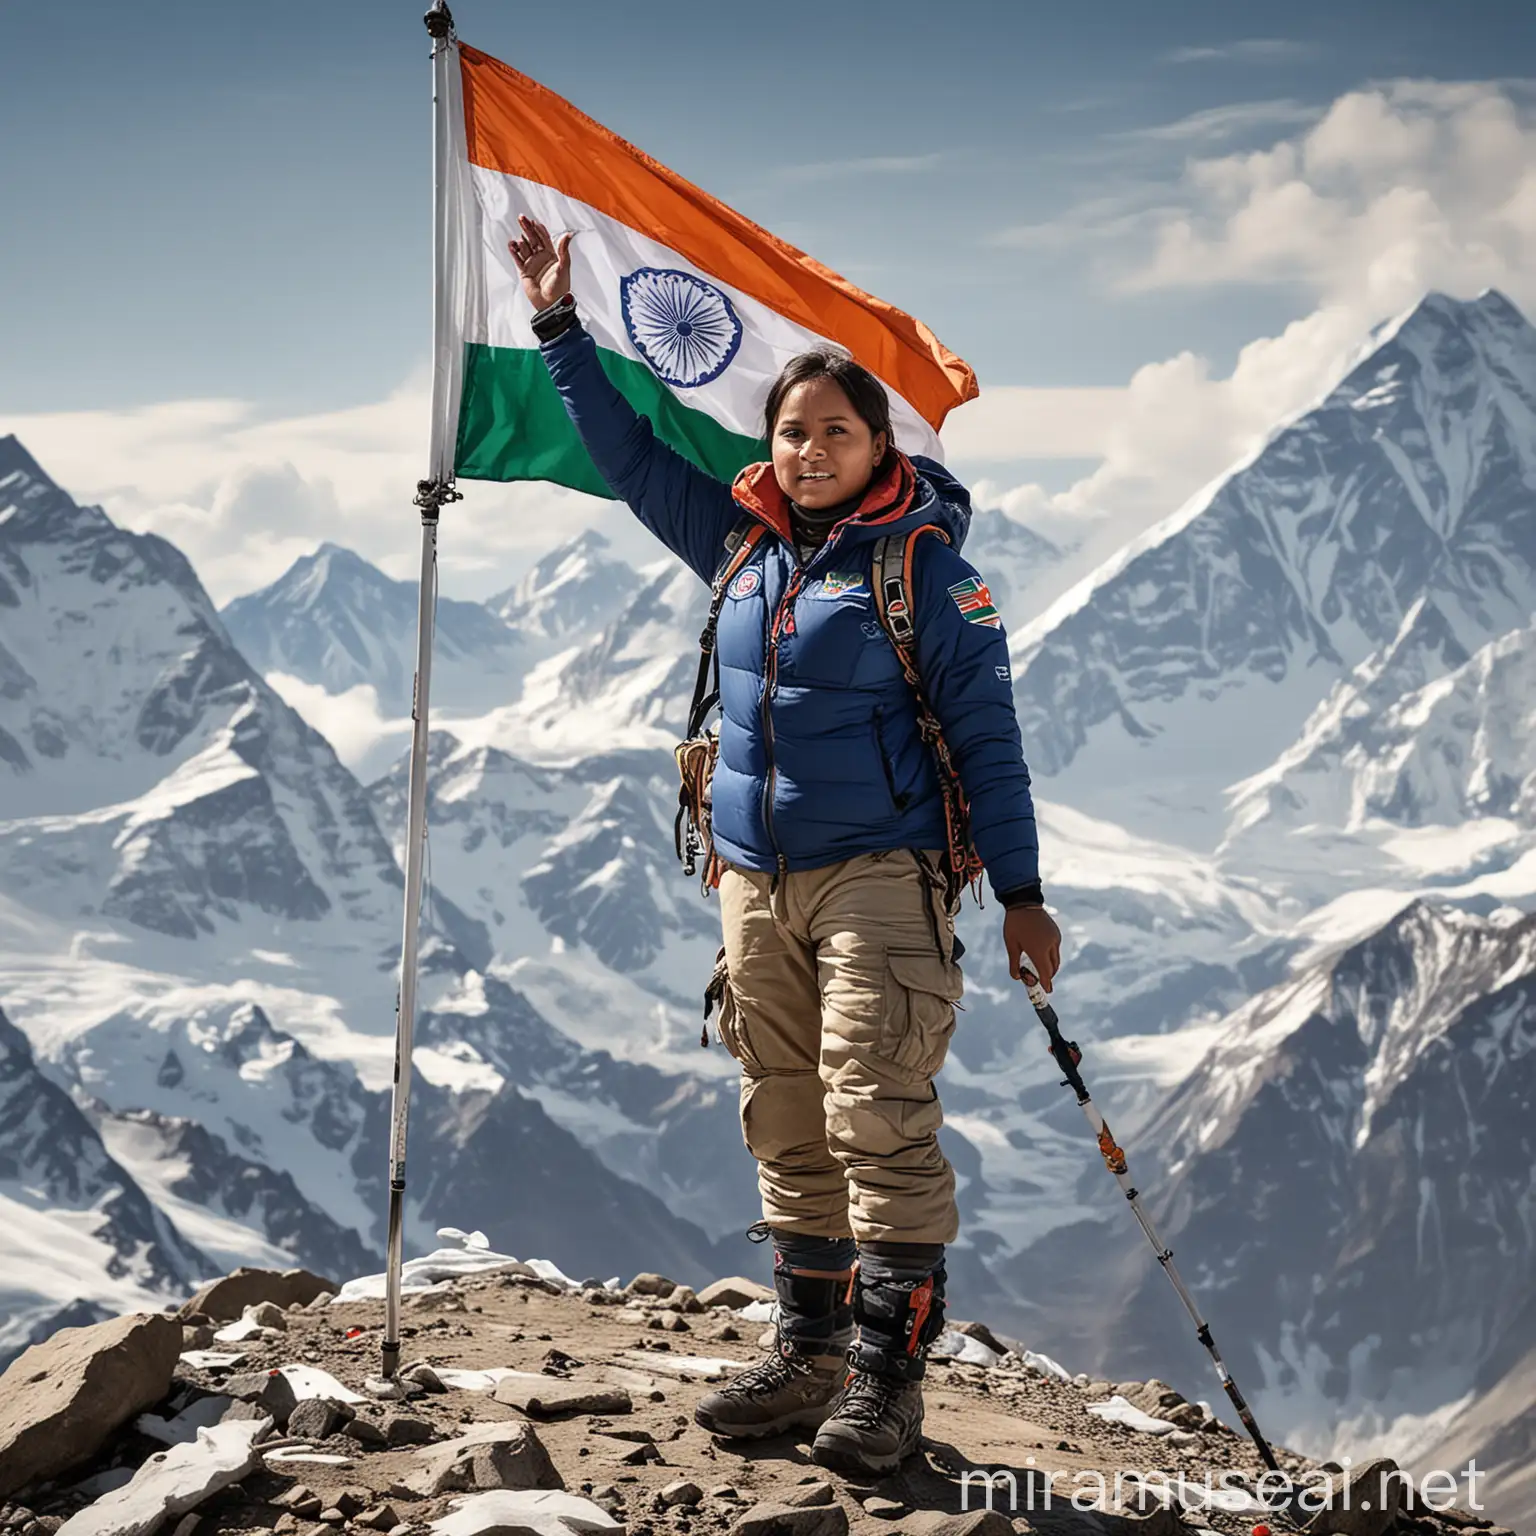 Arunima Sinha Conquers Everest First Female Amputee with Indian Flag